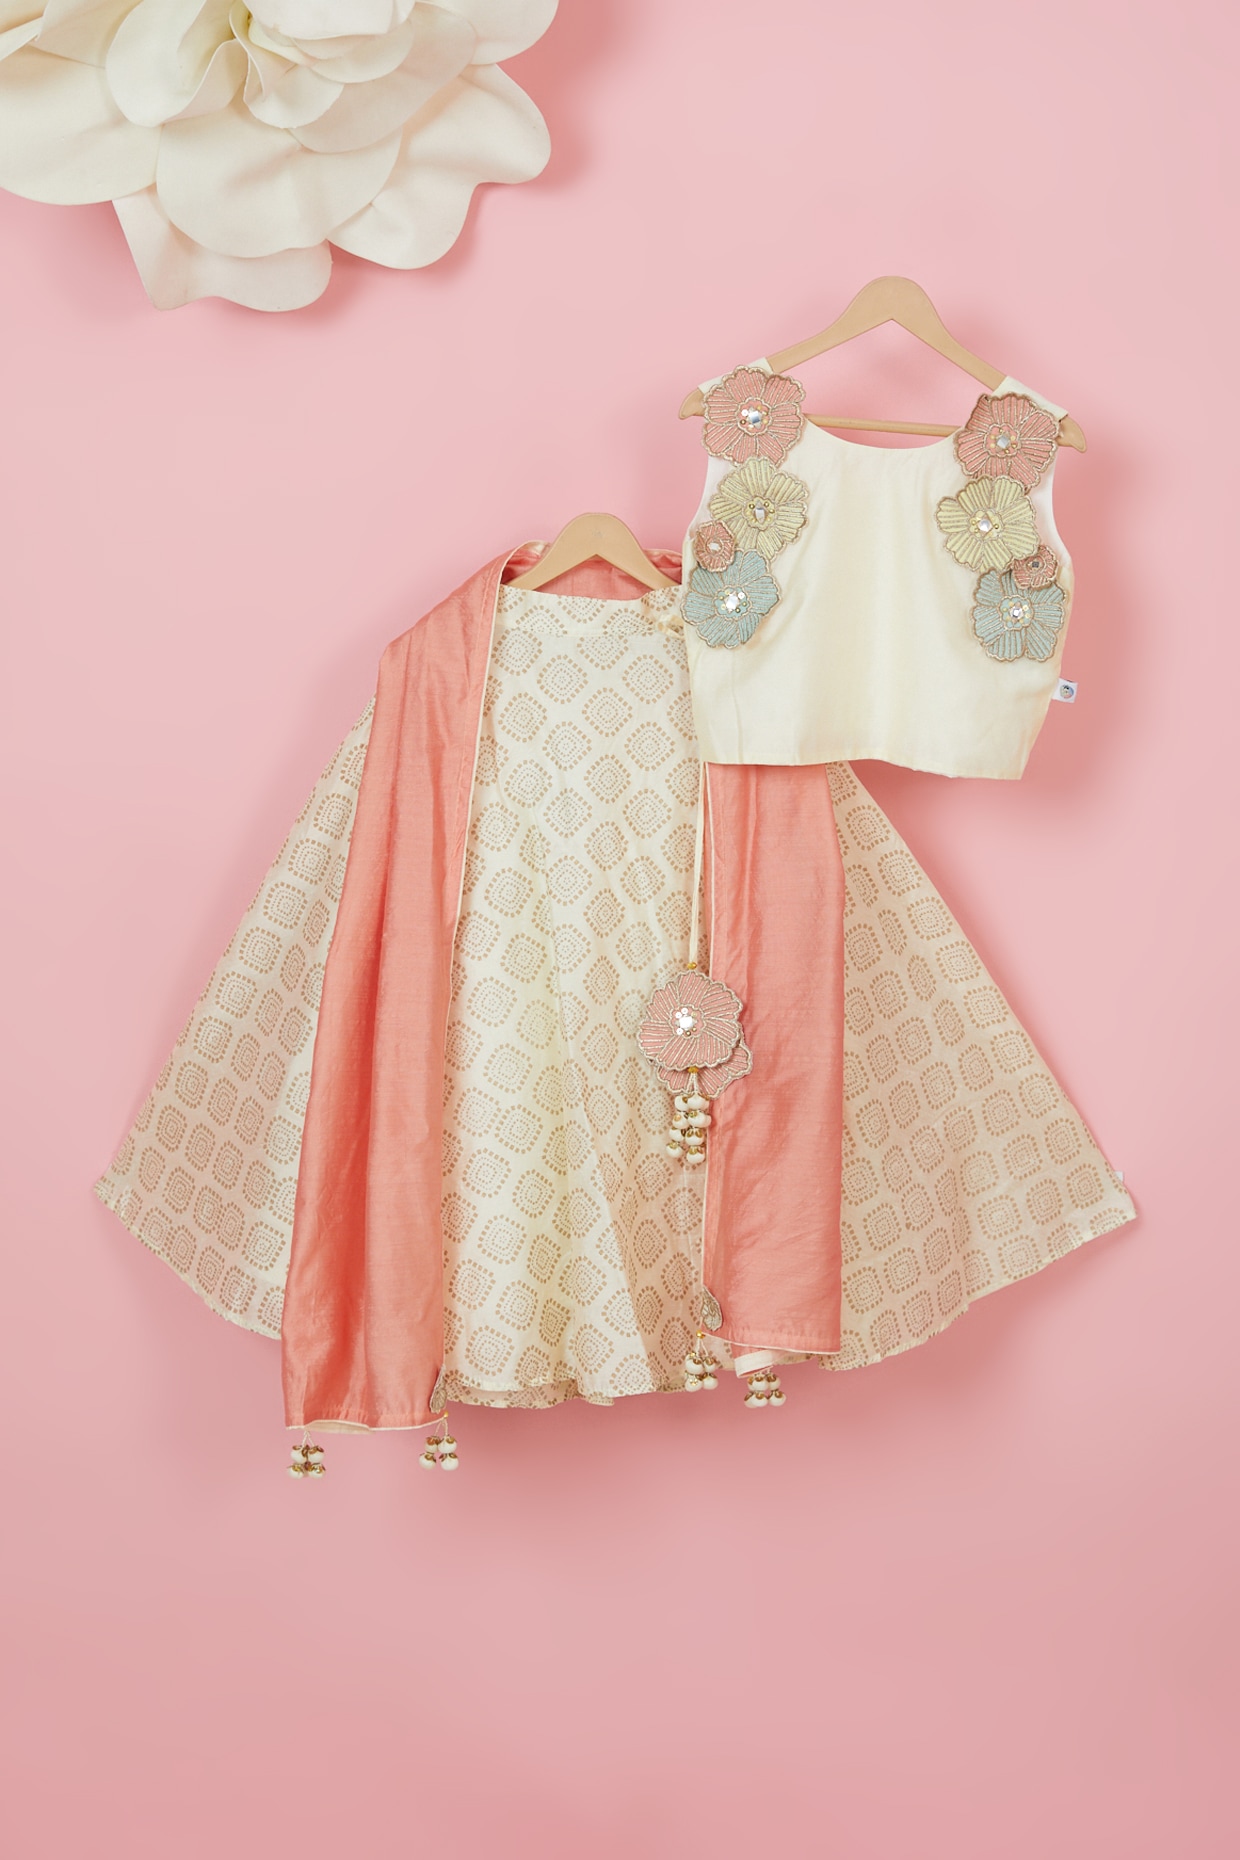 Every Parent Likes Their Kid to be the Center of Attention(2020): Check Our  Lehenga for Kids to Make Your Child Look Cute and Have a No-Fuss Outfit for  Your Next Occasion.